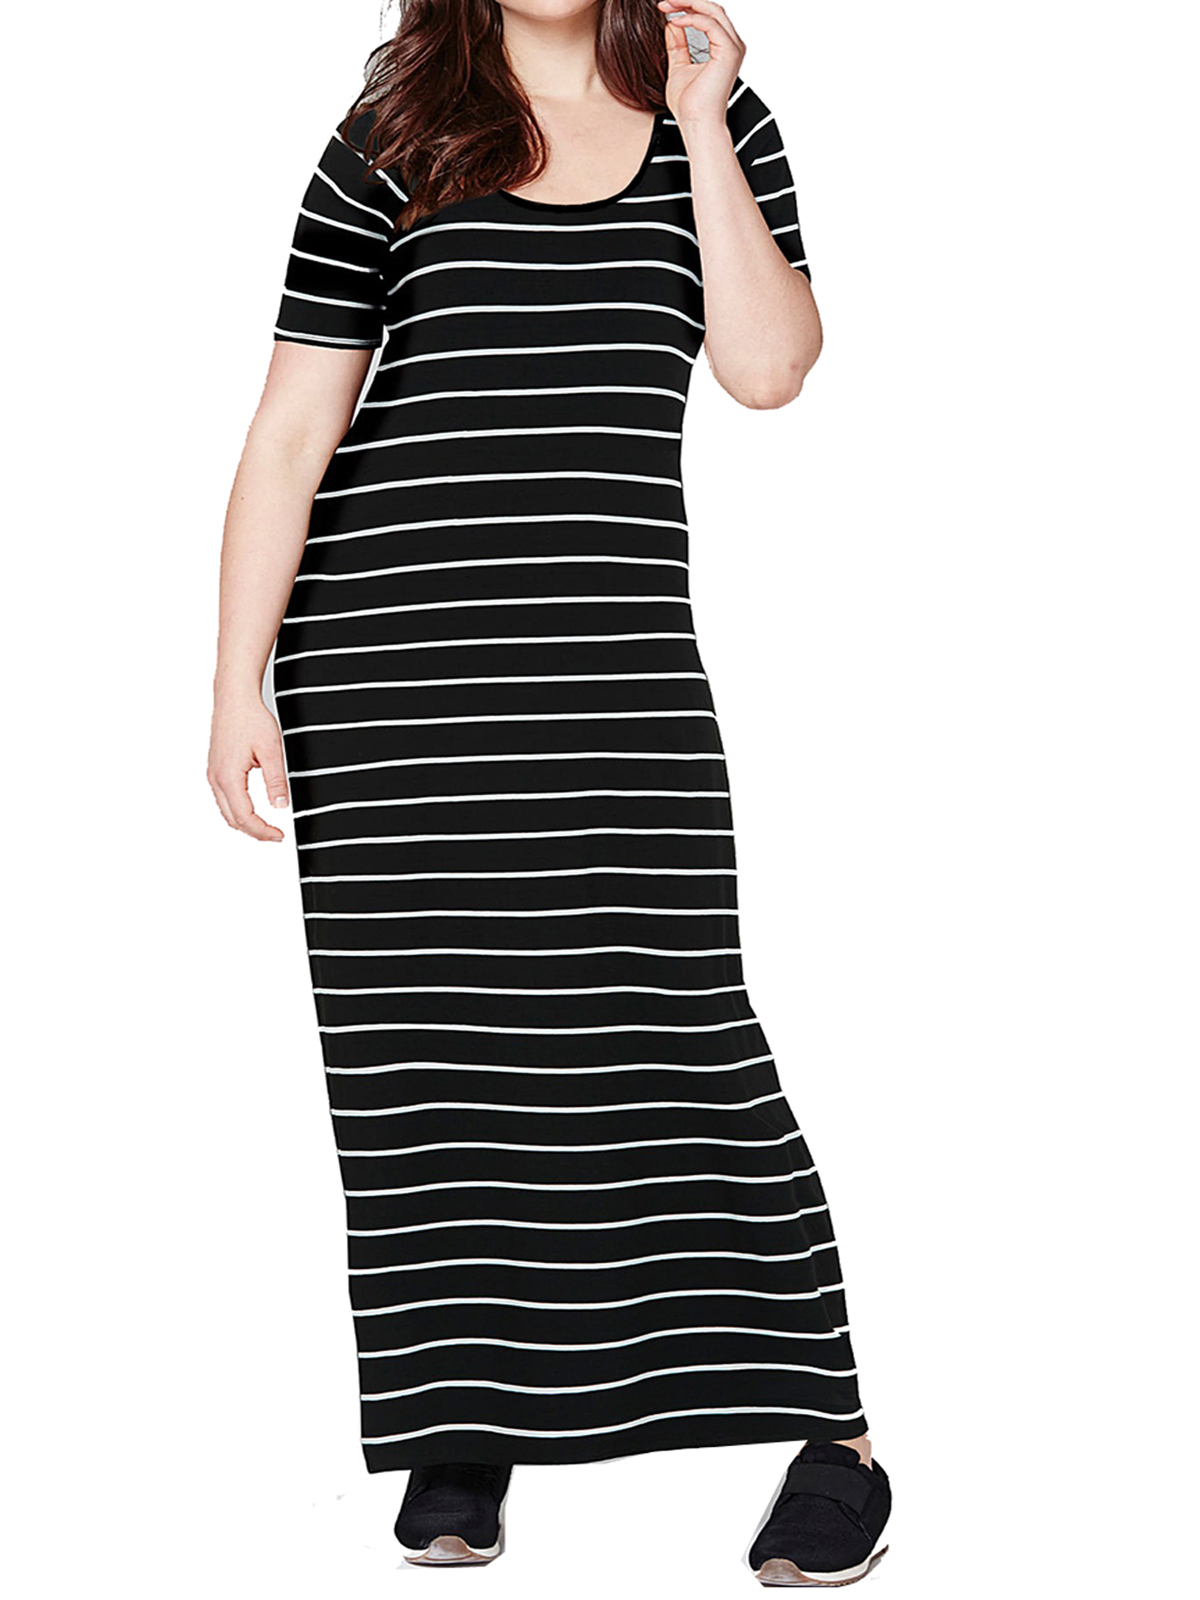 Plus Size wholesale clothing by simply be - - SimplyBe BLACK Stripe ...